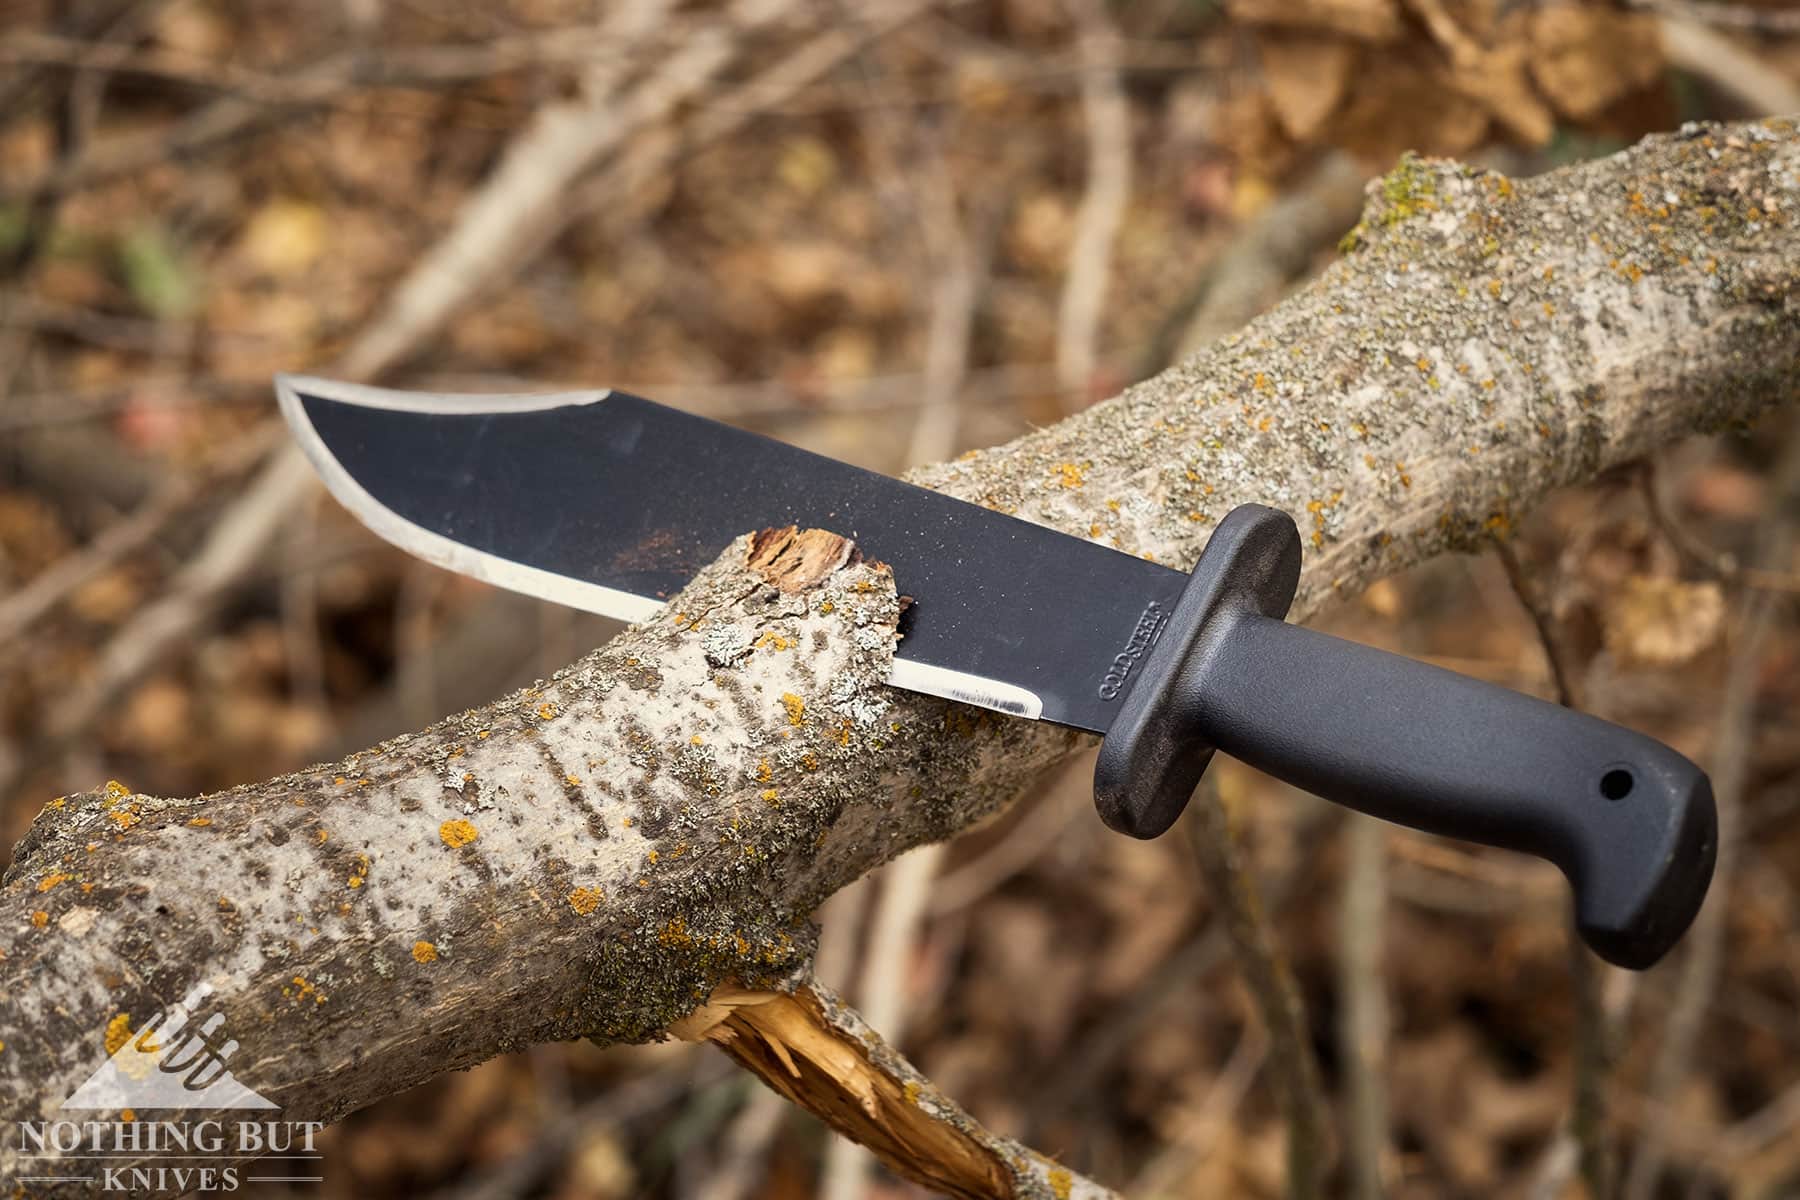 The Black Bear Bowie with its blade stuck in a fallen tree limb.